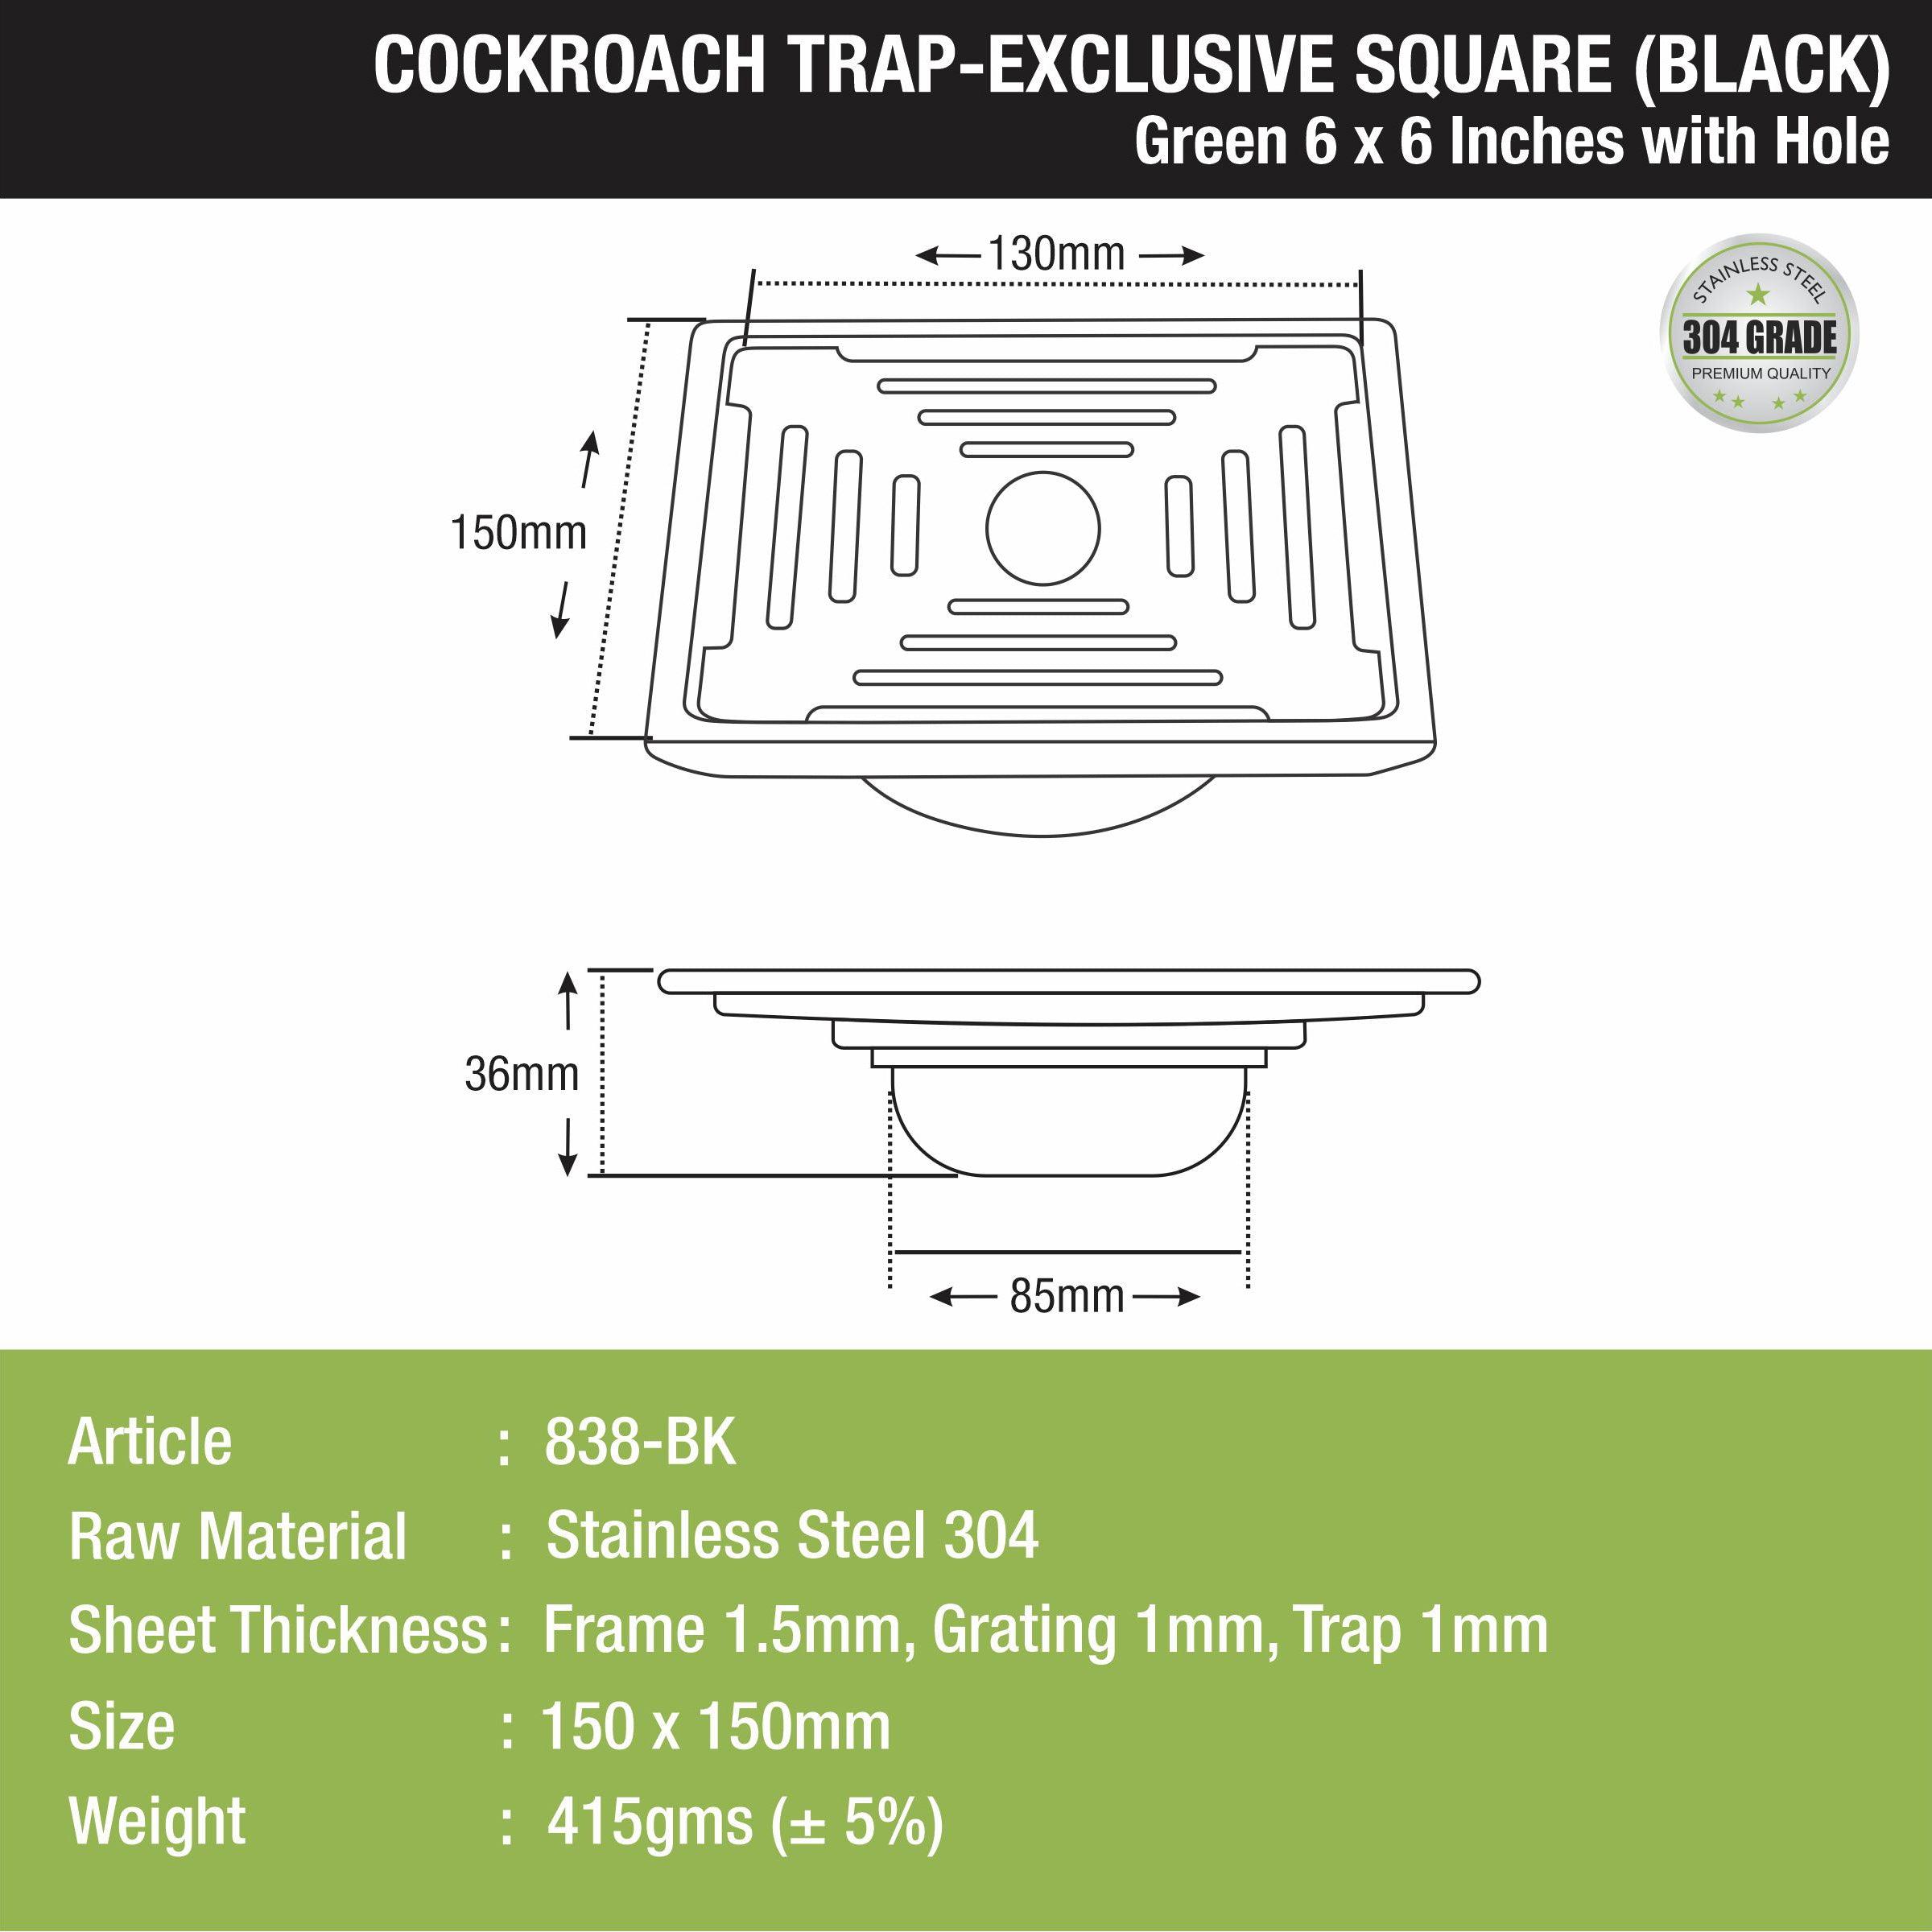 Green Exclusive Square Floor Drain in Black PVD Coating (6 x 6 Inches) with Hole & Cockroach Trap - LIPKA - Lipka Home